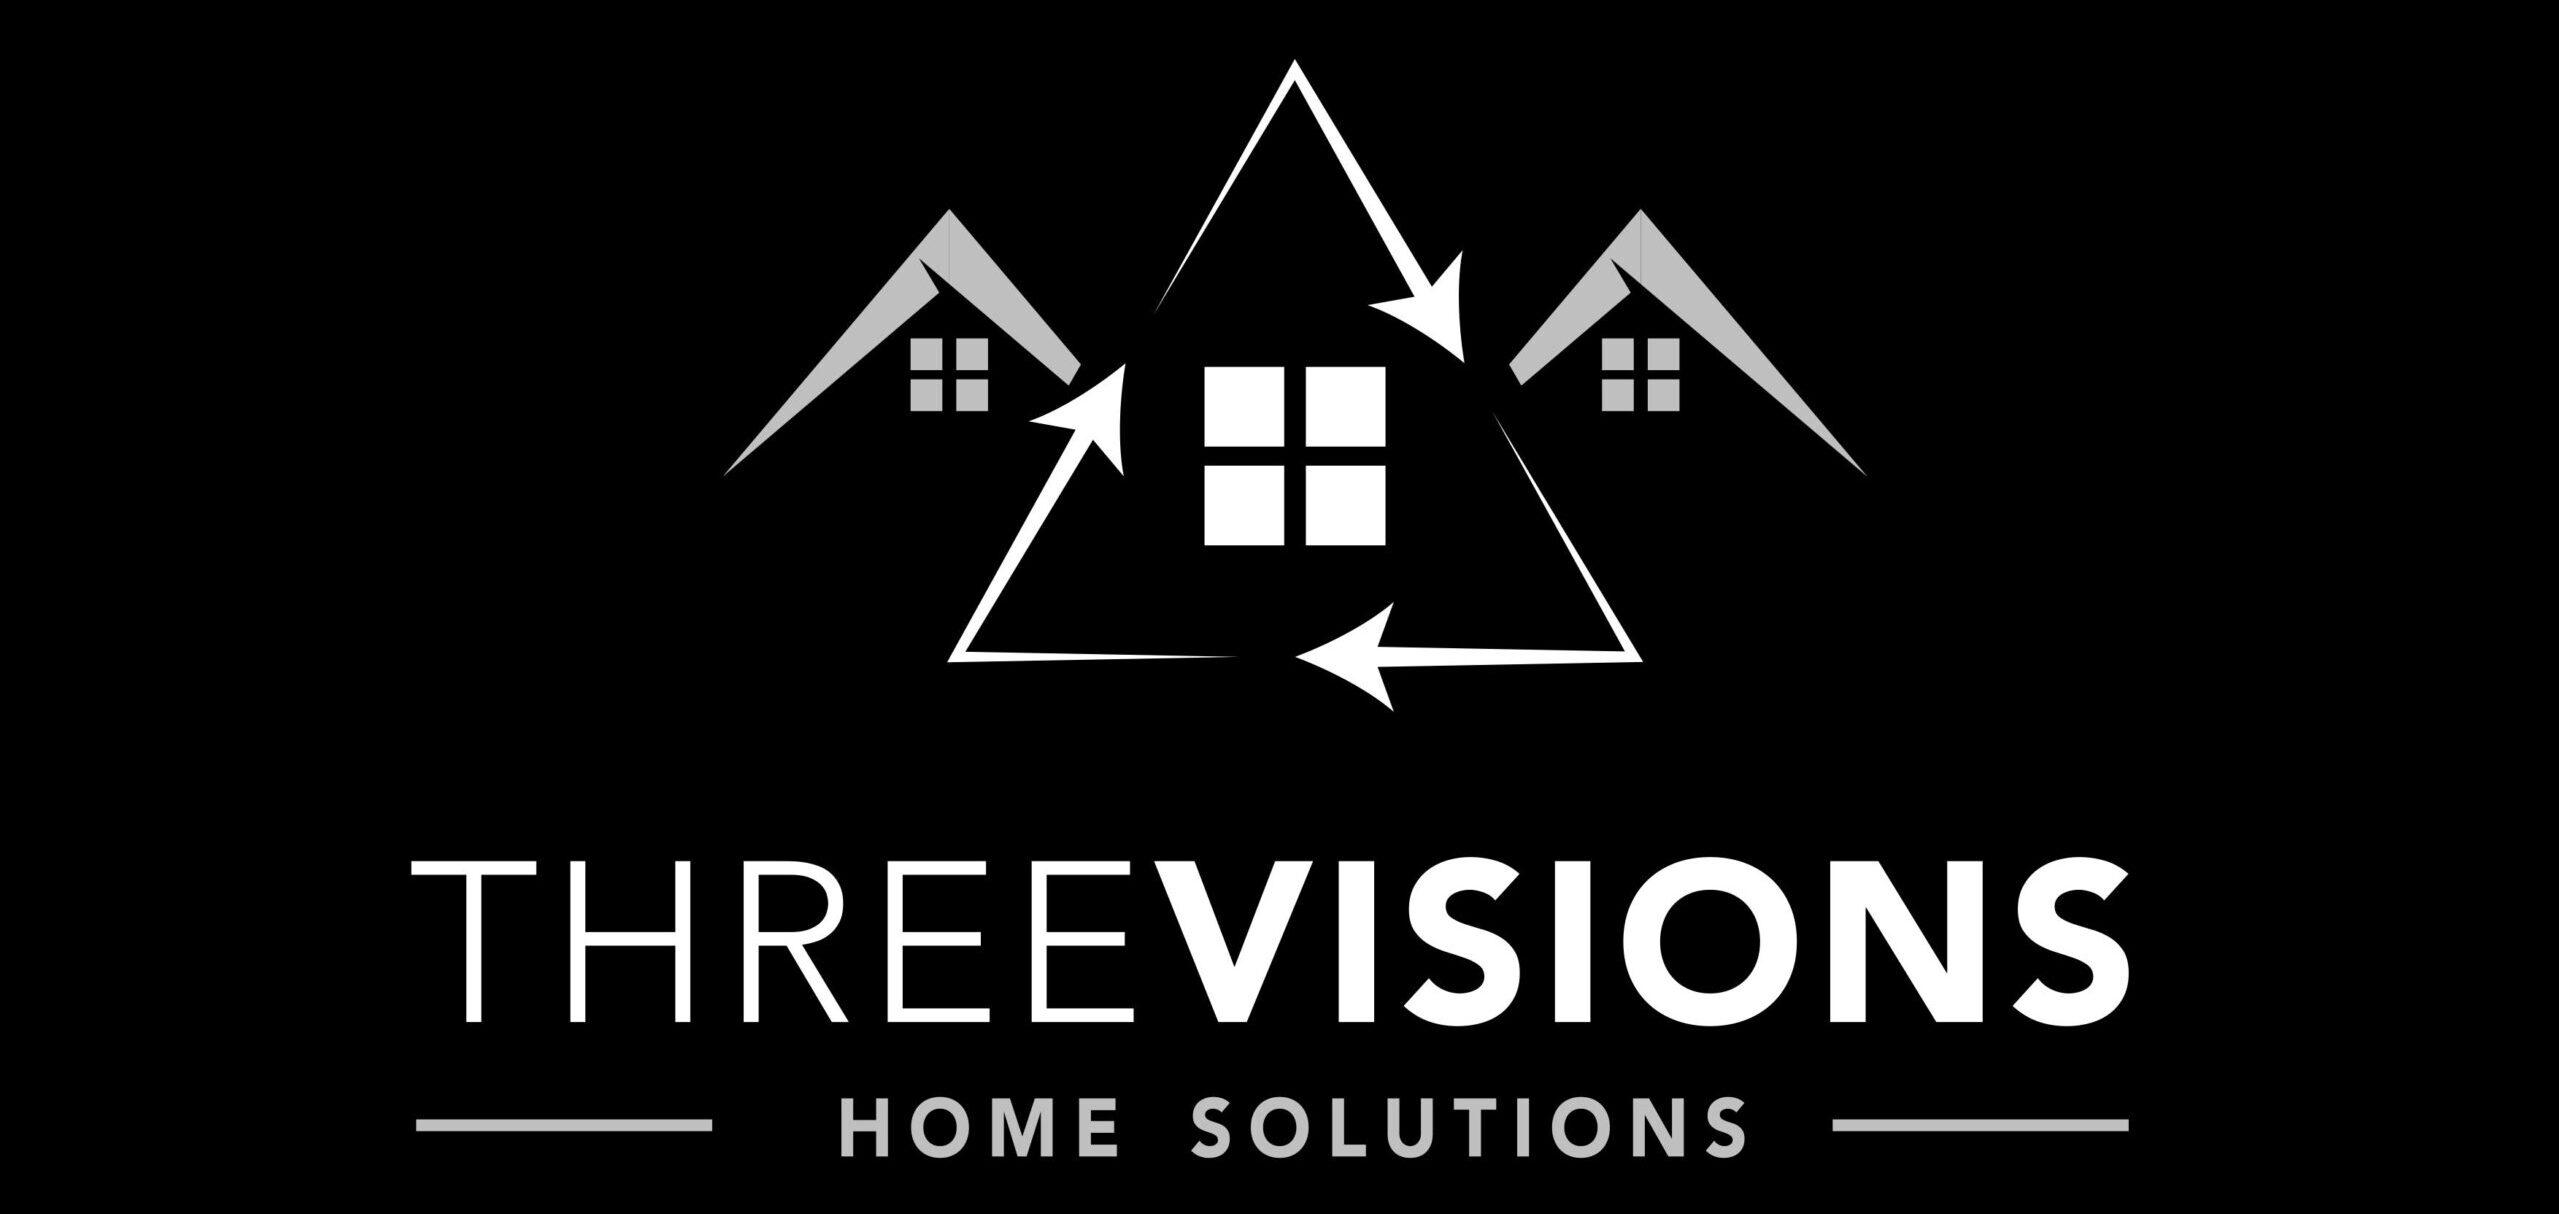 3 VISIONS HOME SOLUTIONS